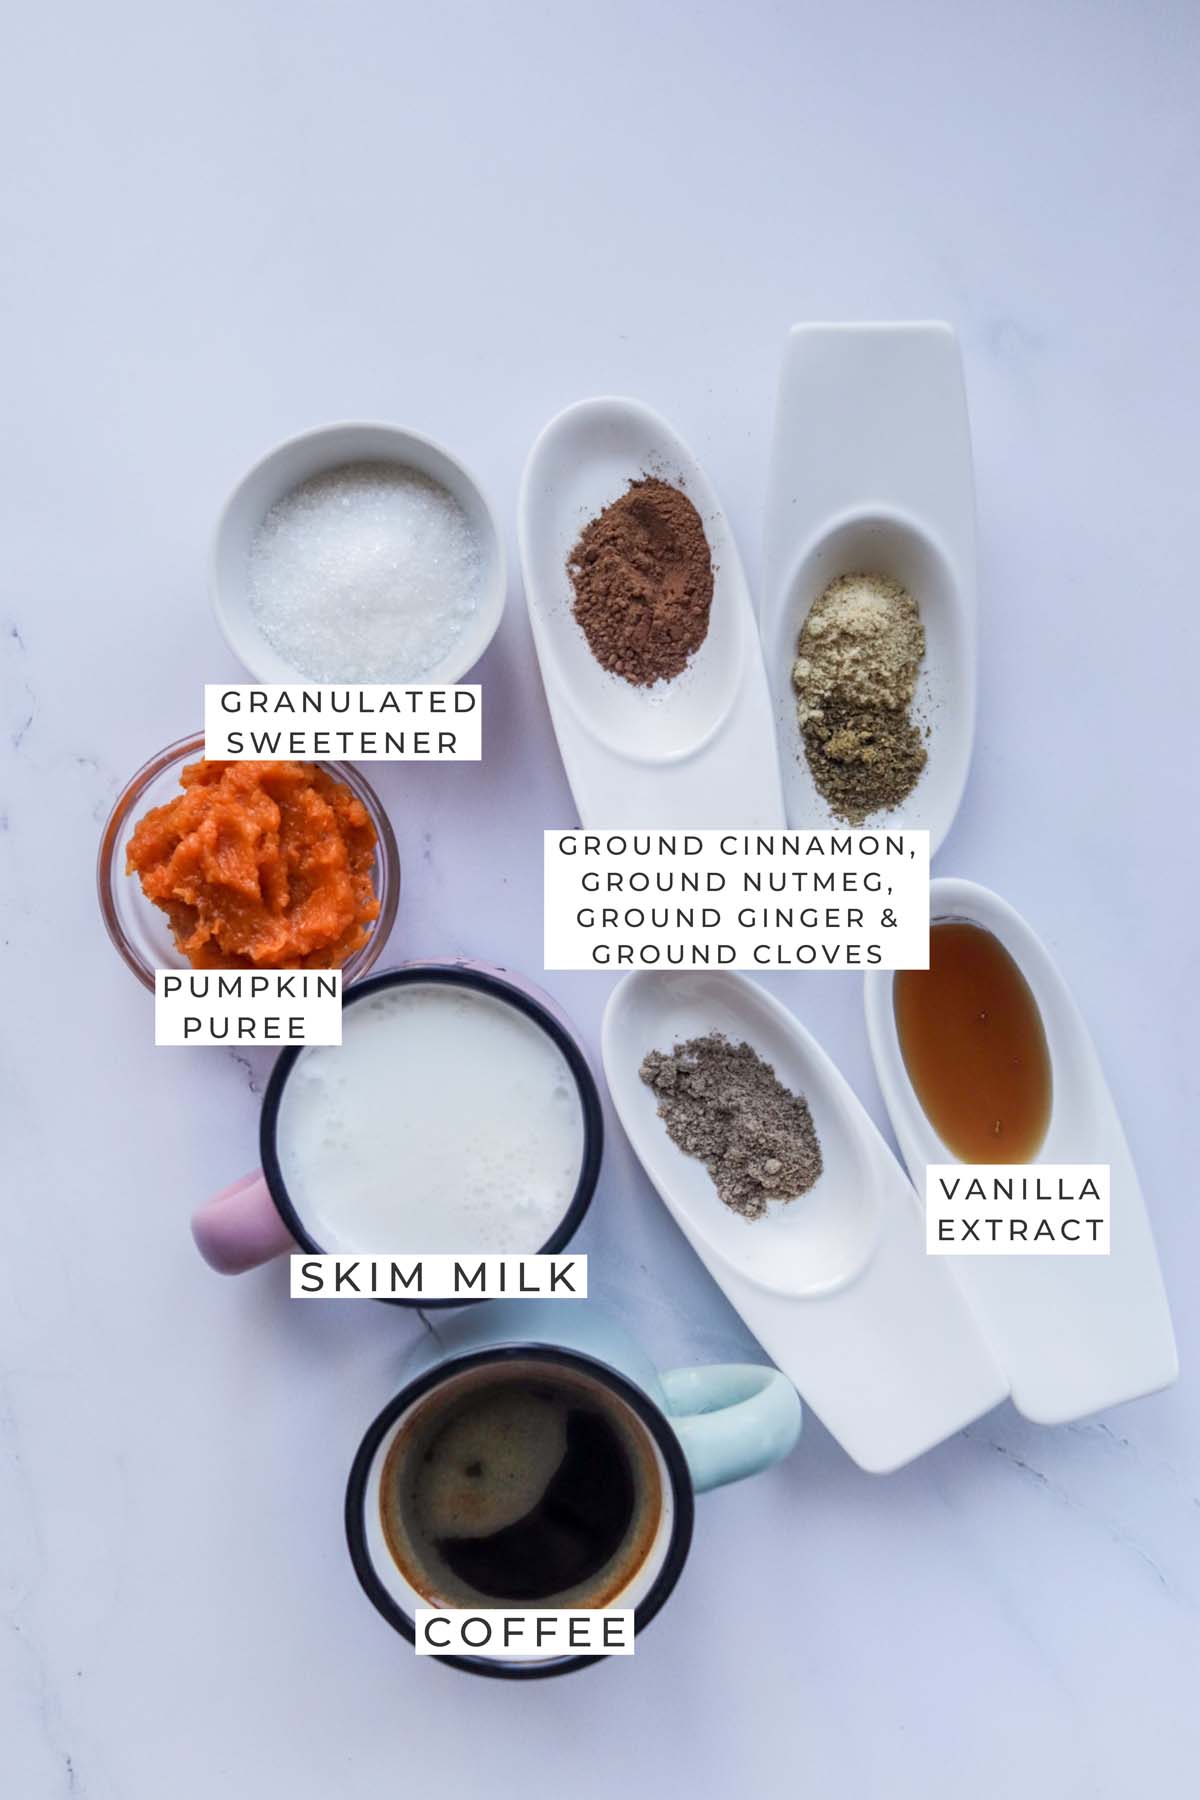 Labeled ingredients for the latte.